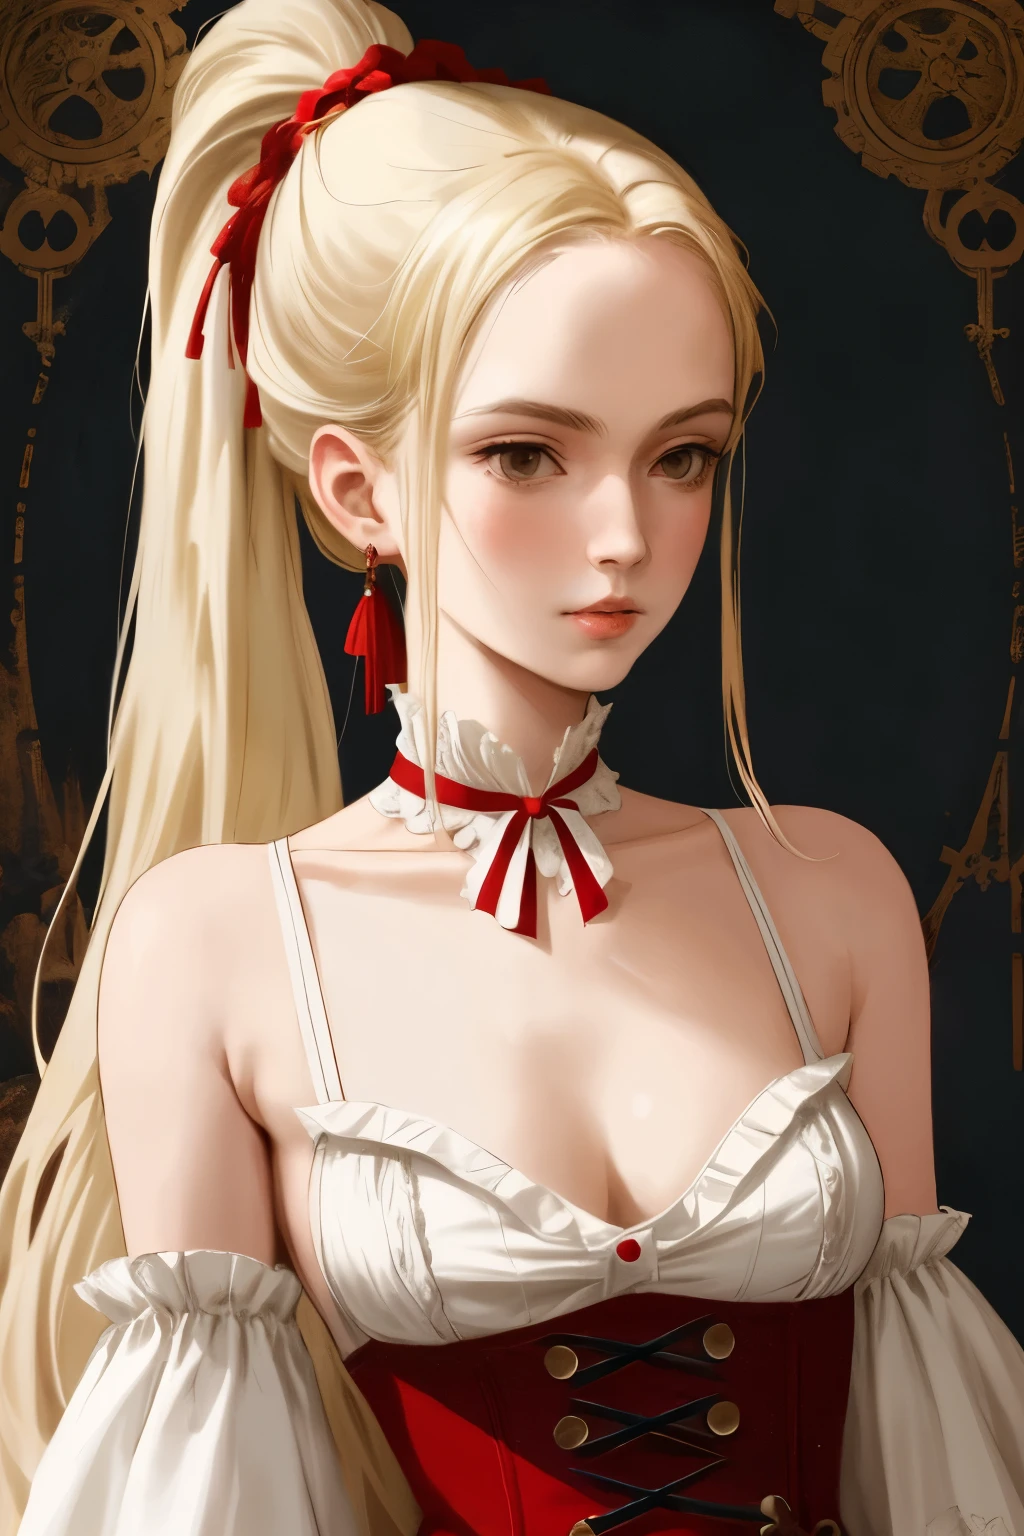 ((best quality)), ((masterpiece)), (detailed), NSFW, small breasts, prominent collarbones, skinny arms, flat stomach, visible hip bones, long hair, red hair, white hair, blonde hair, dark hair, ponytail, thick ponytail, heavy ponytail, red and white clothing, Bloodborne inspired, occult aesthetic, occult, detailed and intricate steampunk and detailed gothic